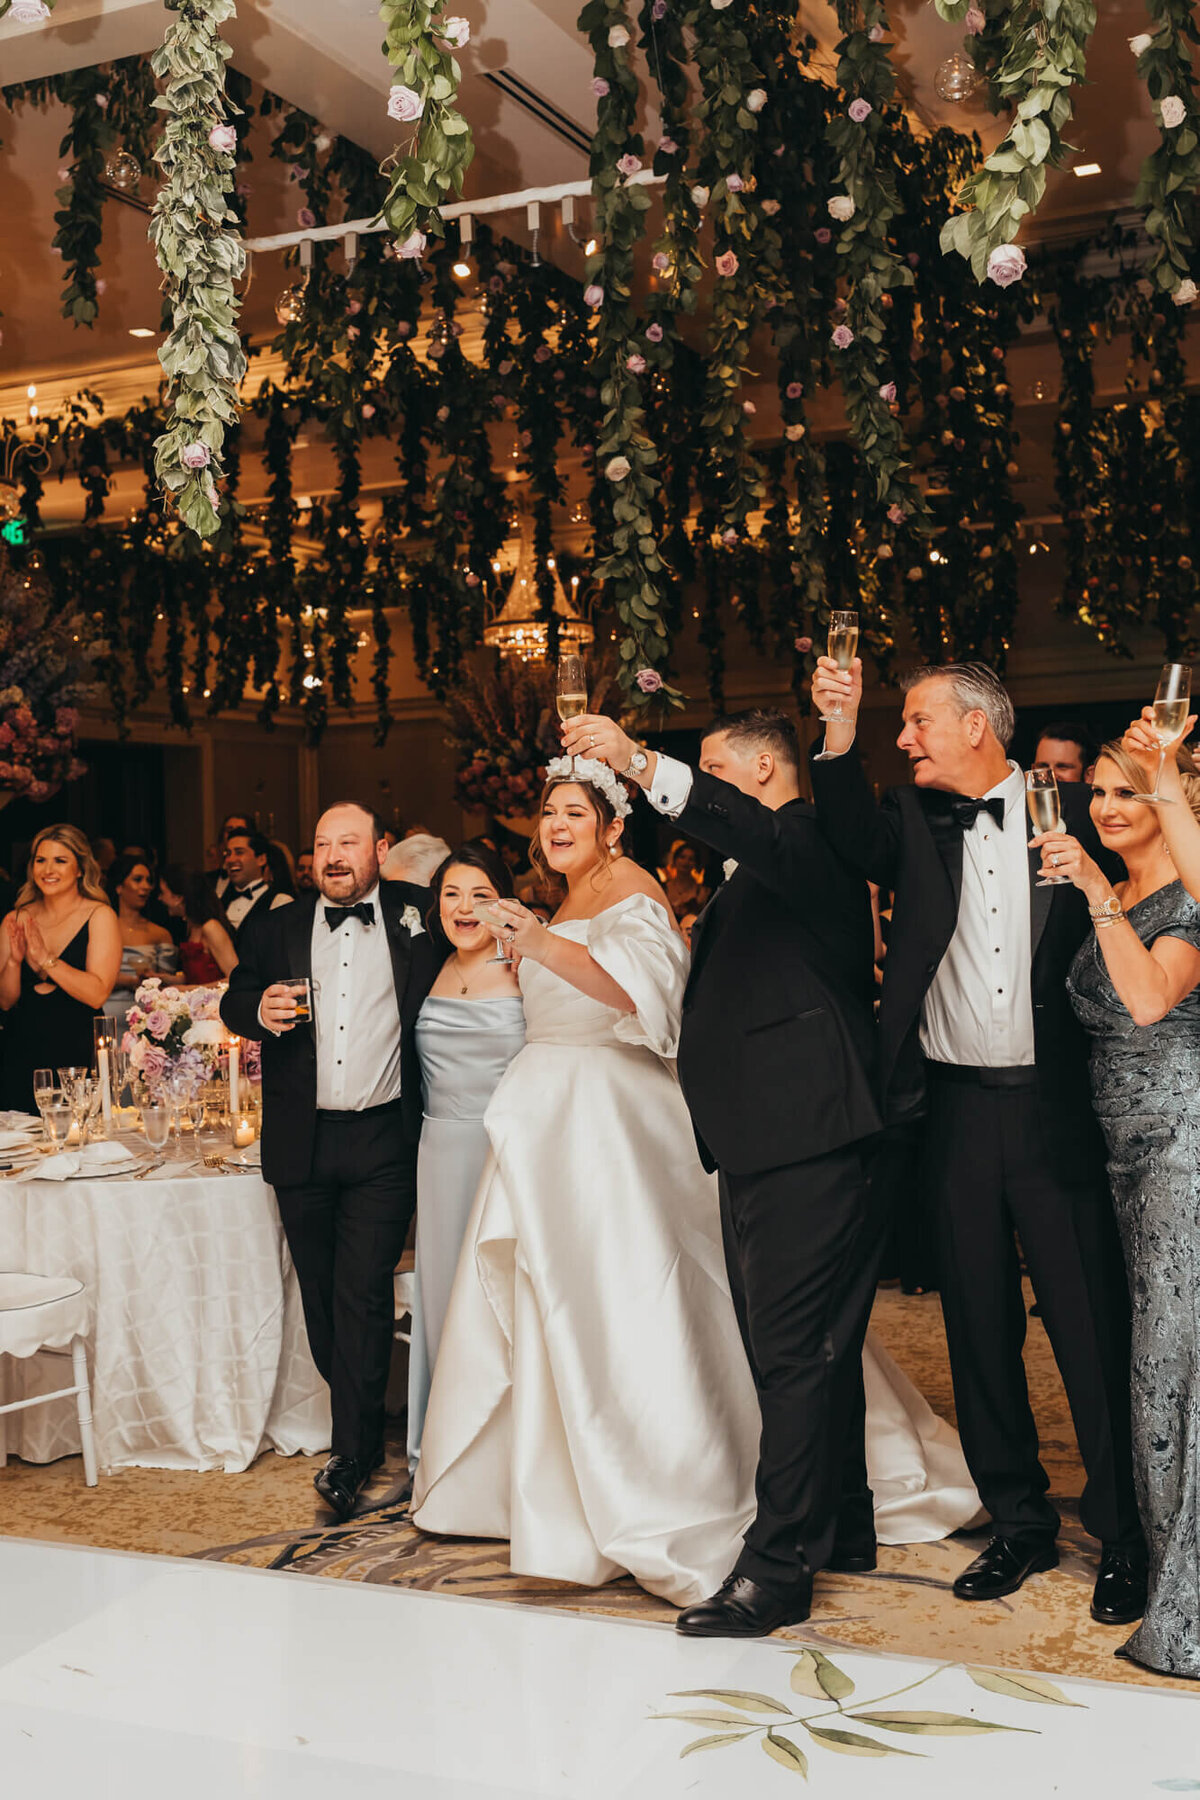 bride and groom raise their glass to a toast about their special day, from brides dad.